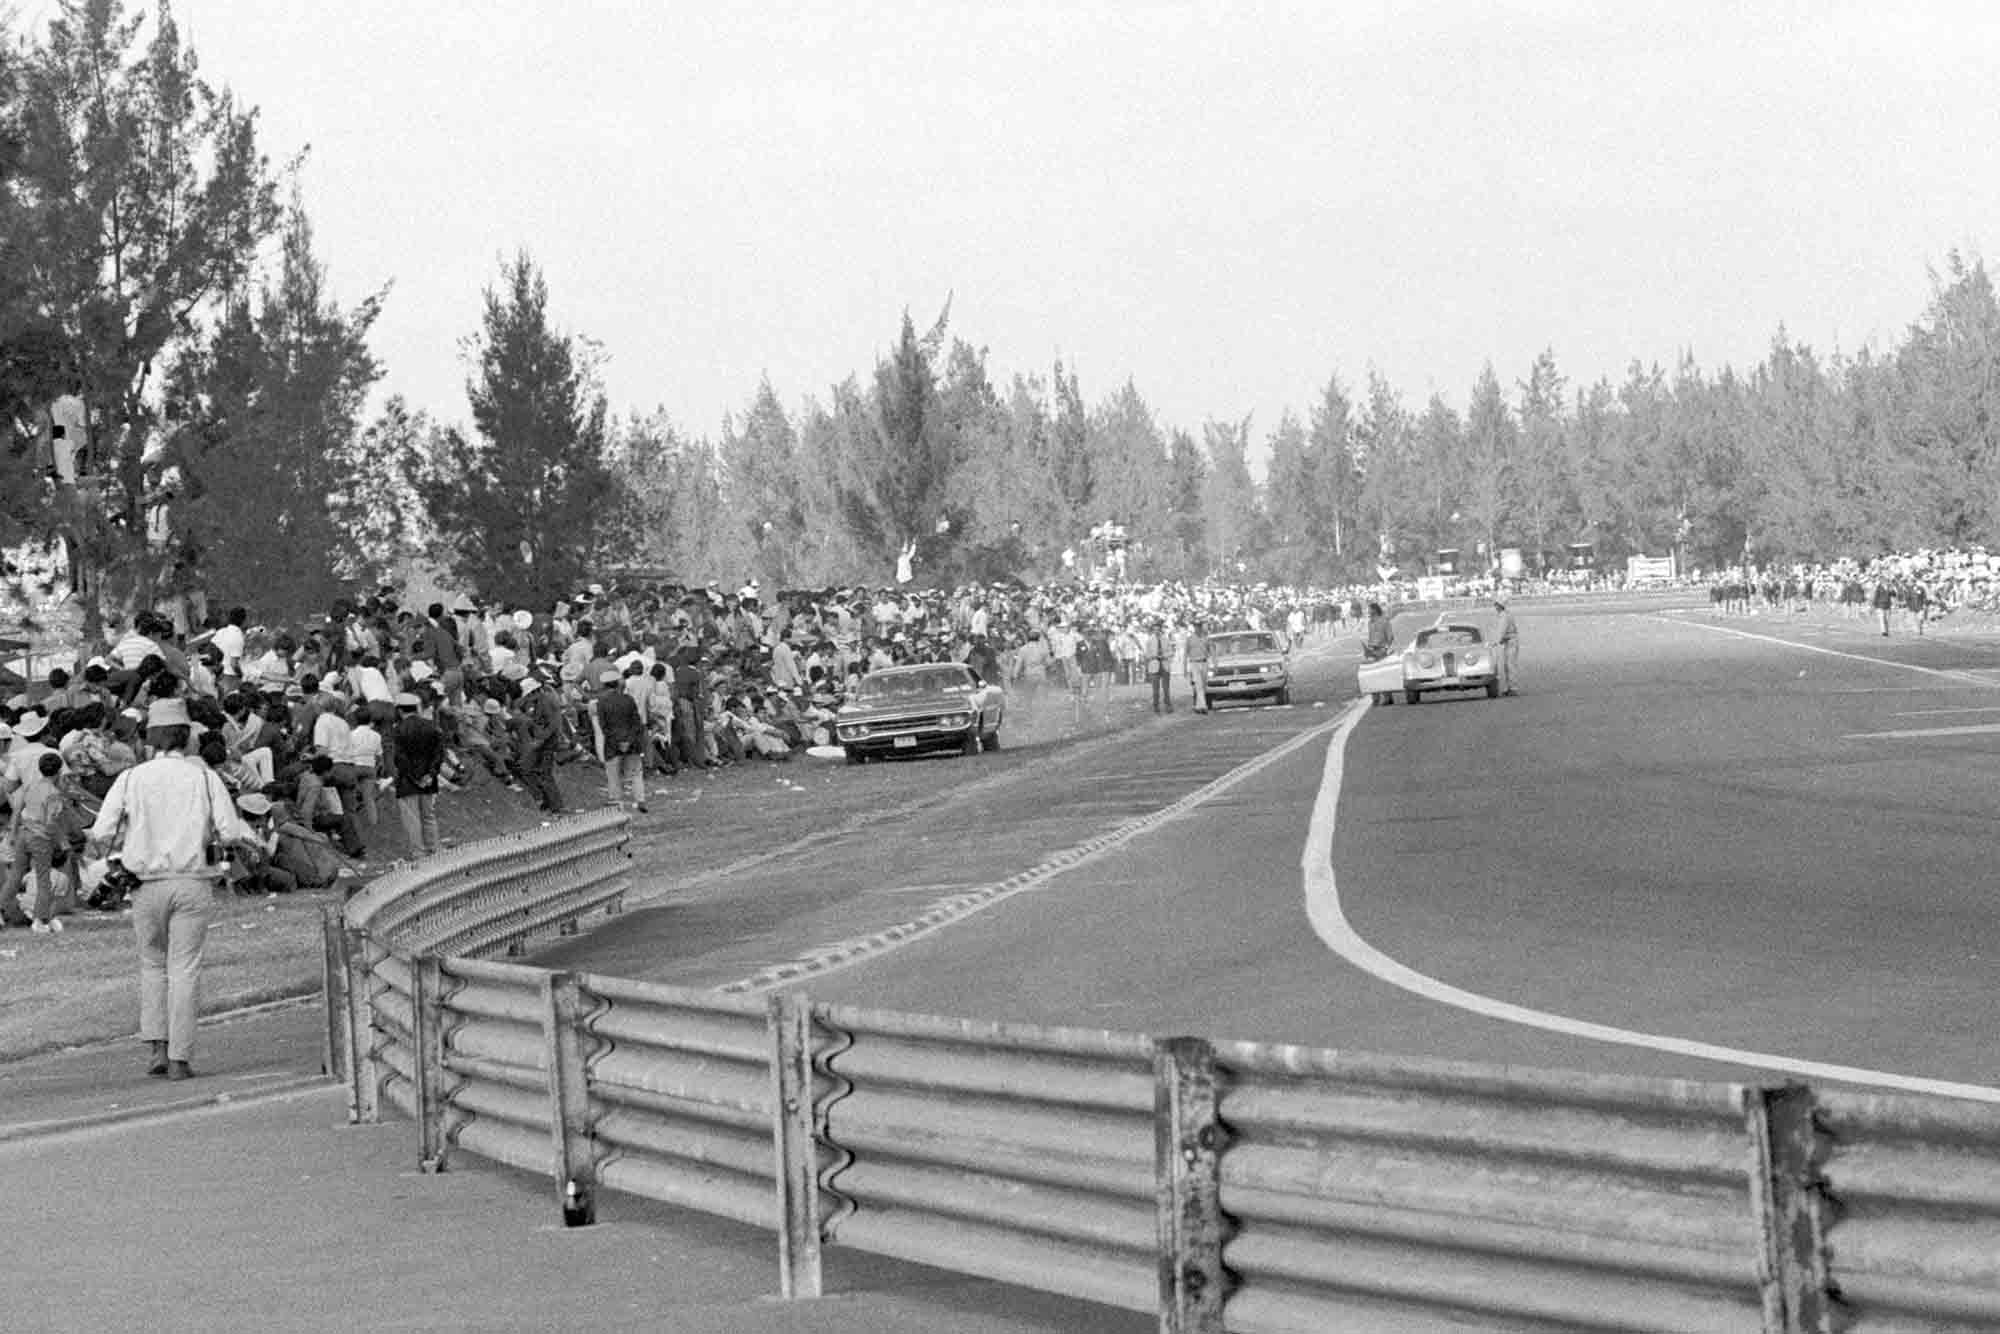 Drivers implore crowds to step back before start fo 1970 Mexican Grand Prix